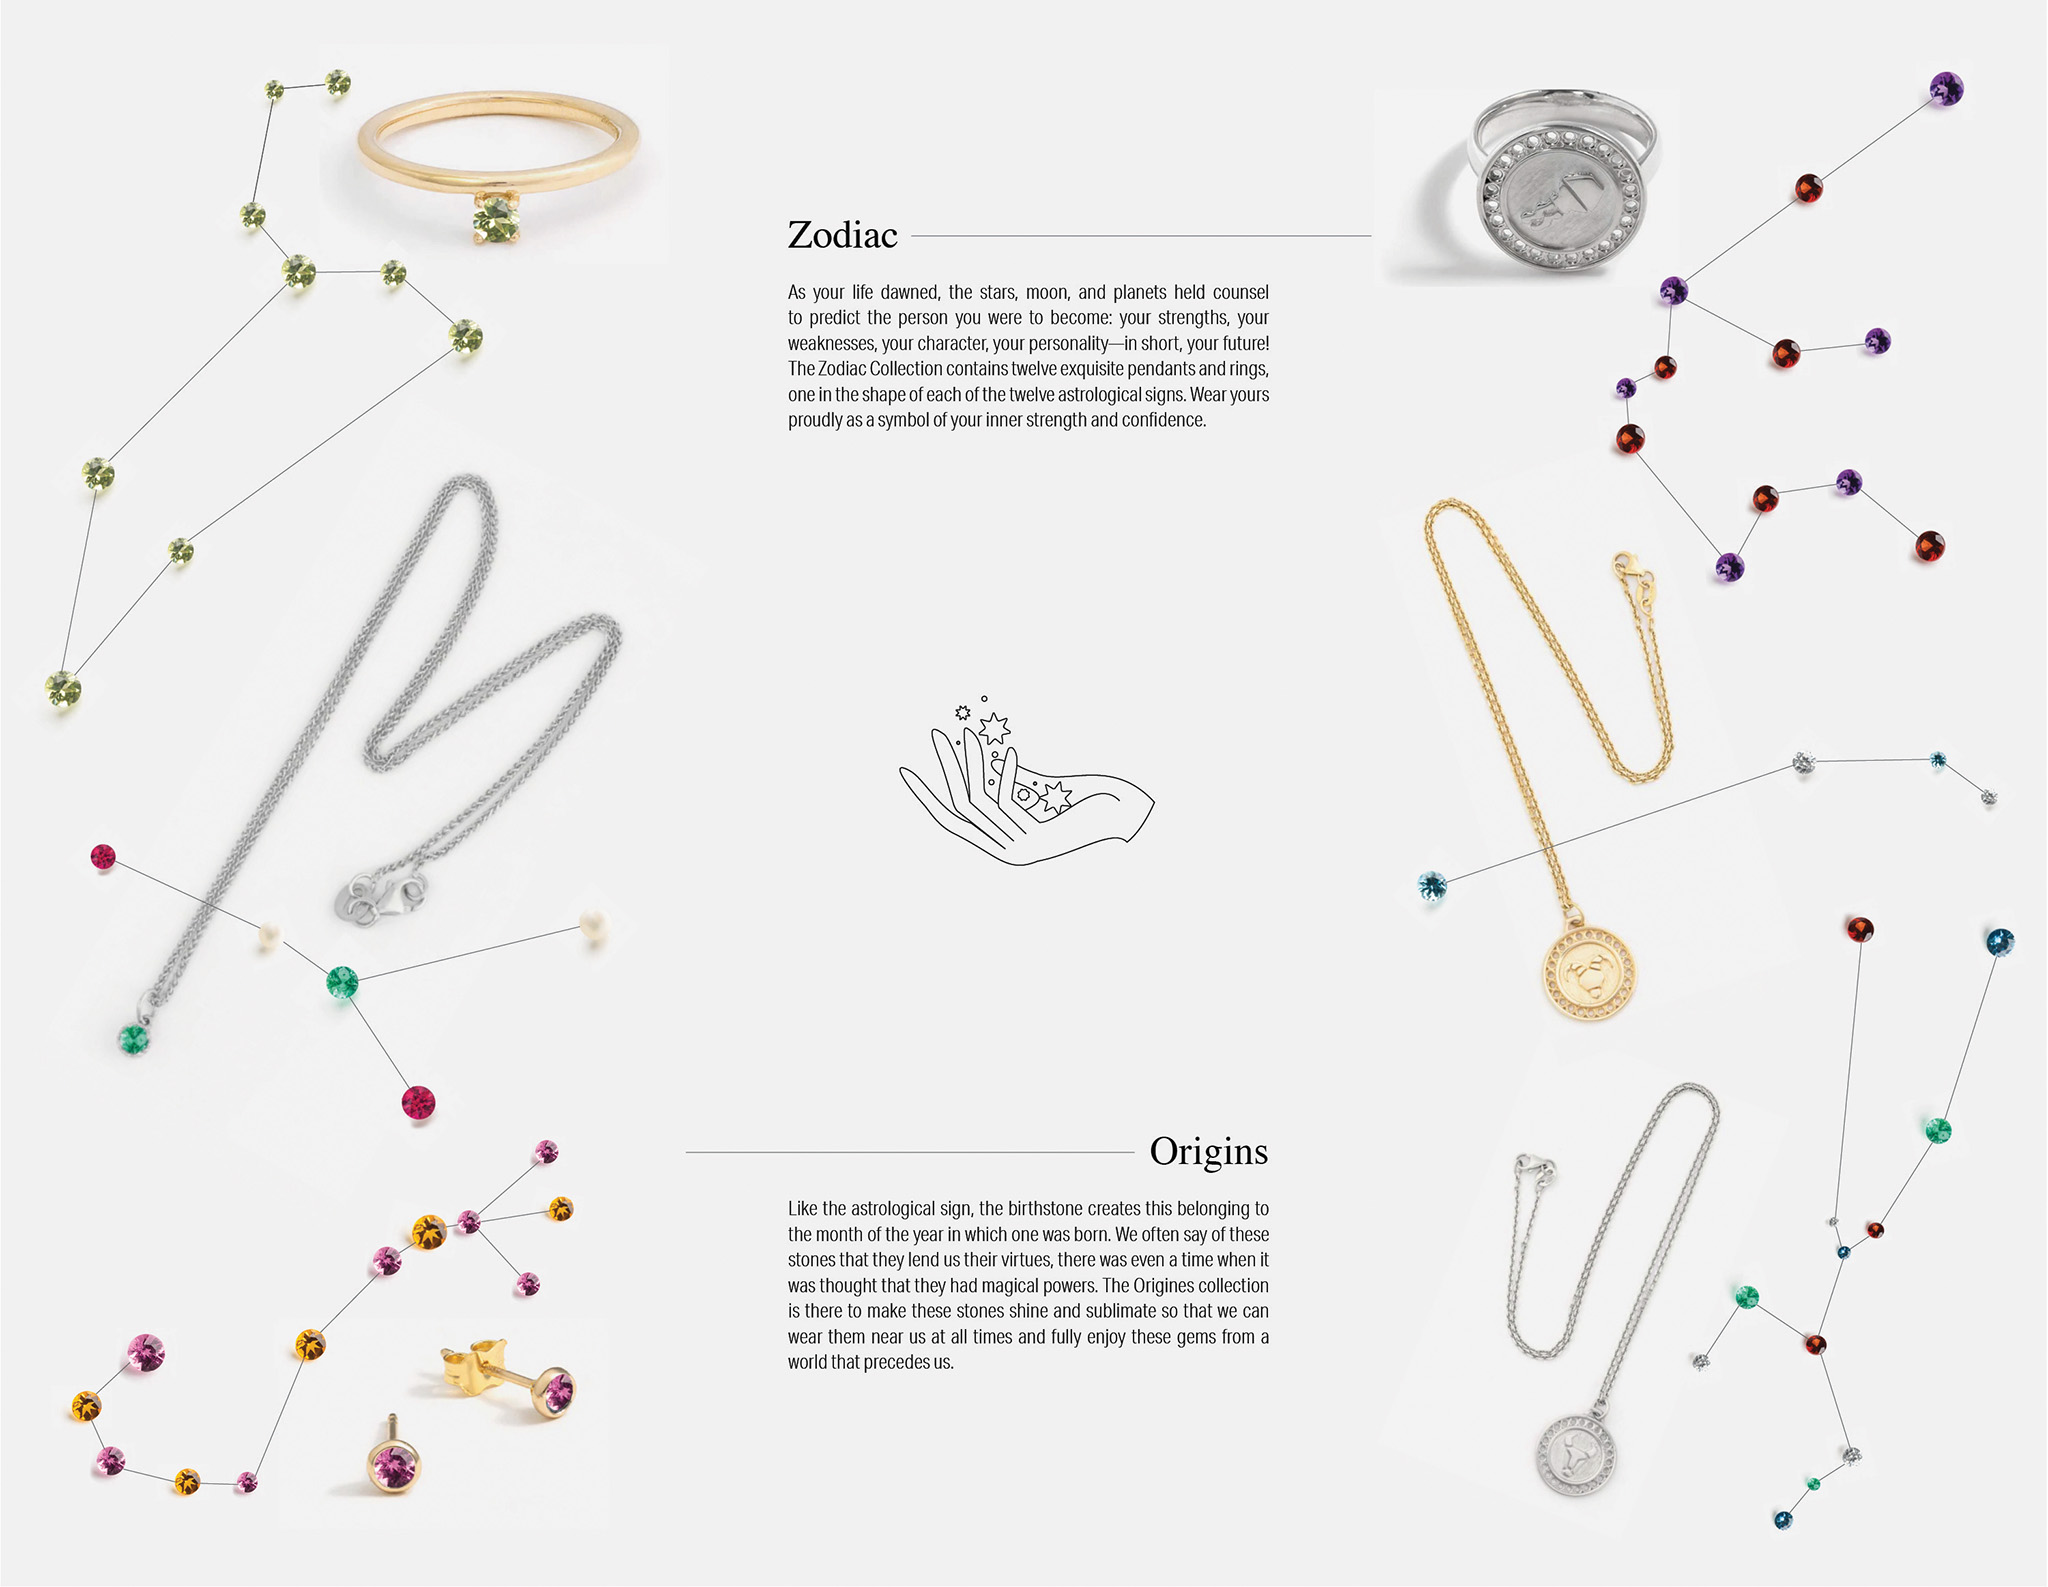 Design for one inside of brochure for jewellery company Myel. The three panels feature photography of the jewellery, text describing the Origins and Zodiac collections. Astrological constellation designs made up of lines and gems and a small illustration of a hand with starts in it.